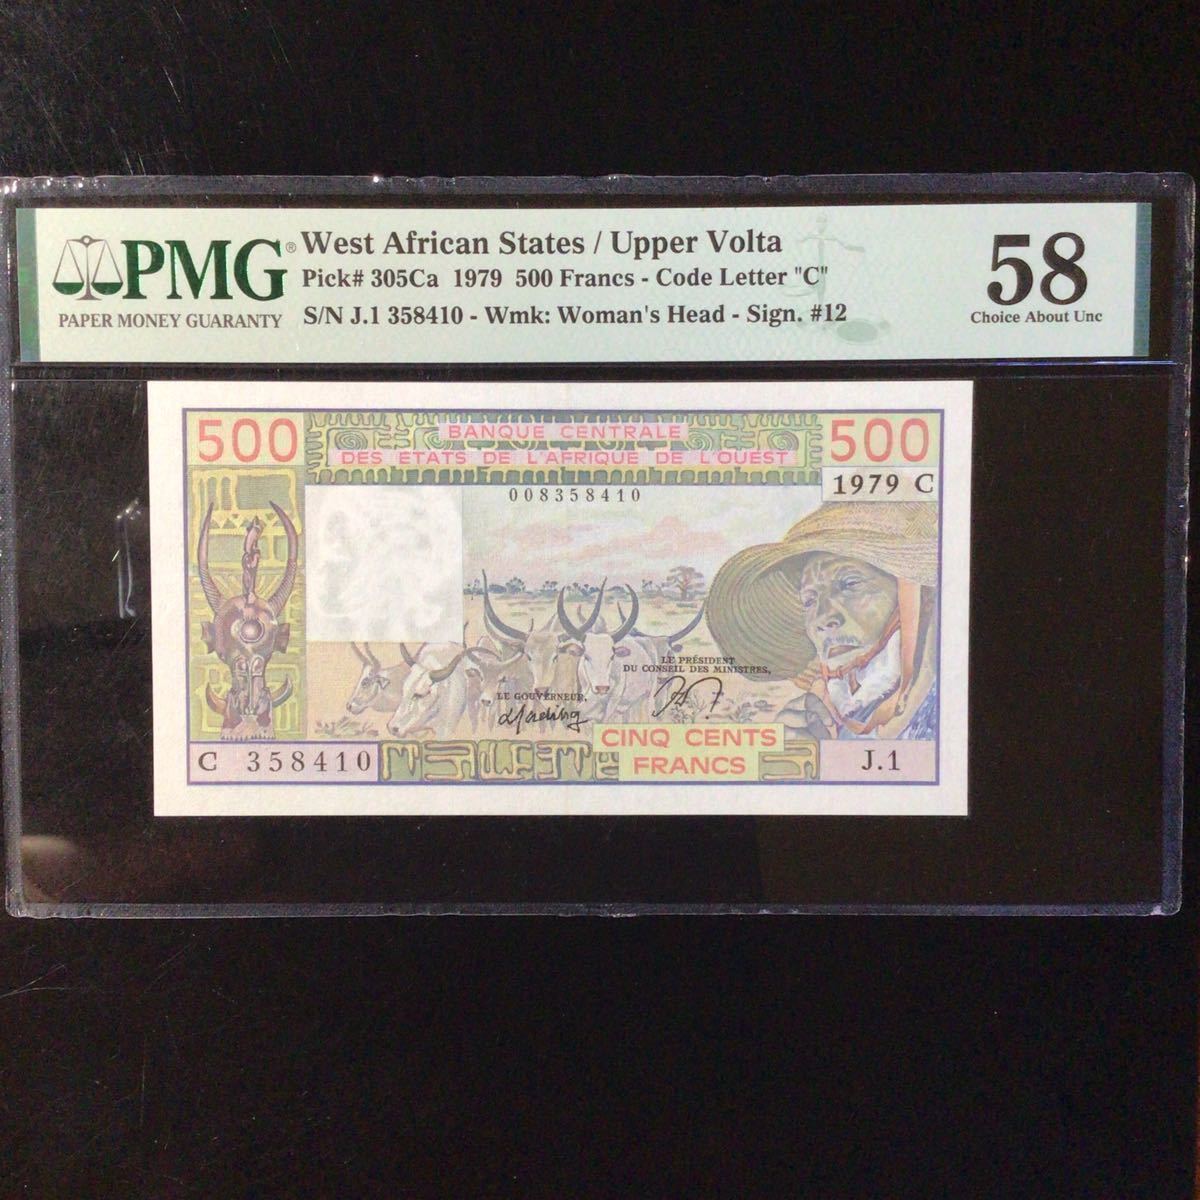 World Banknote Grading WEST AFRICAN STATES 《UPPER VOLTA》500 Francs【1979】『PMG Grading Choice About Unc 58』